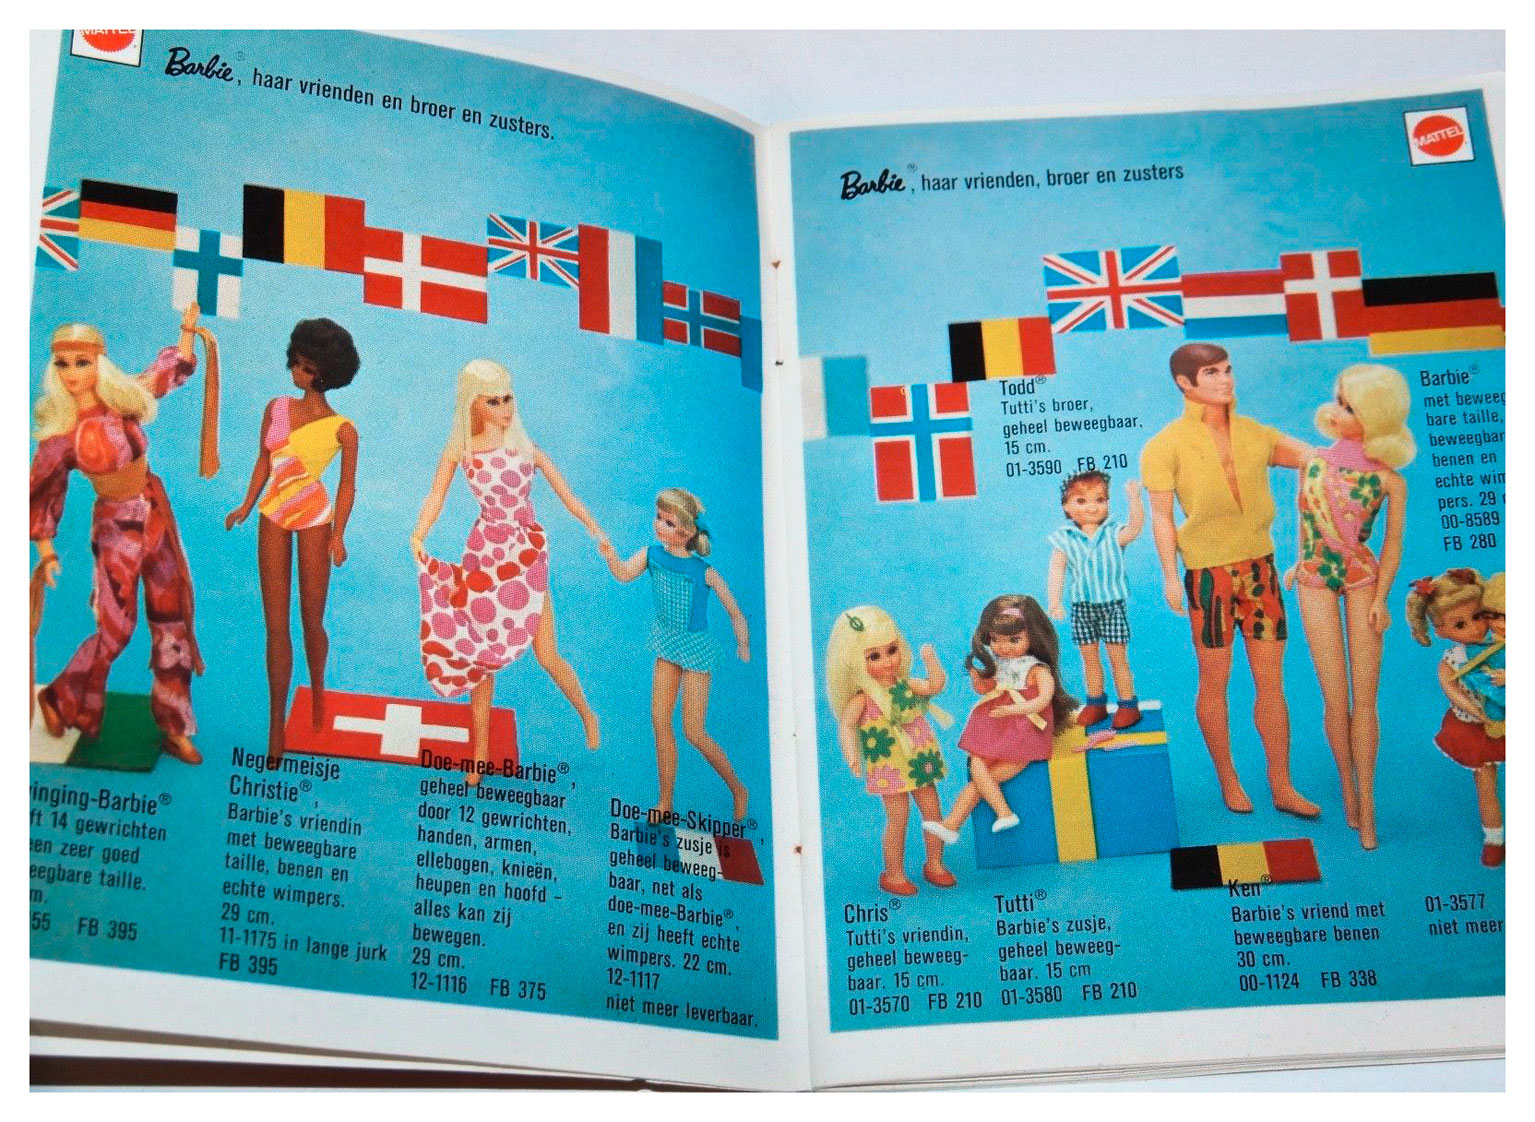 From 1973 Dutch Barbie booklet